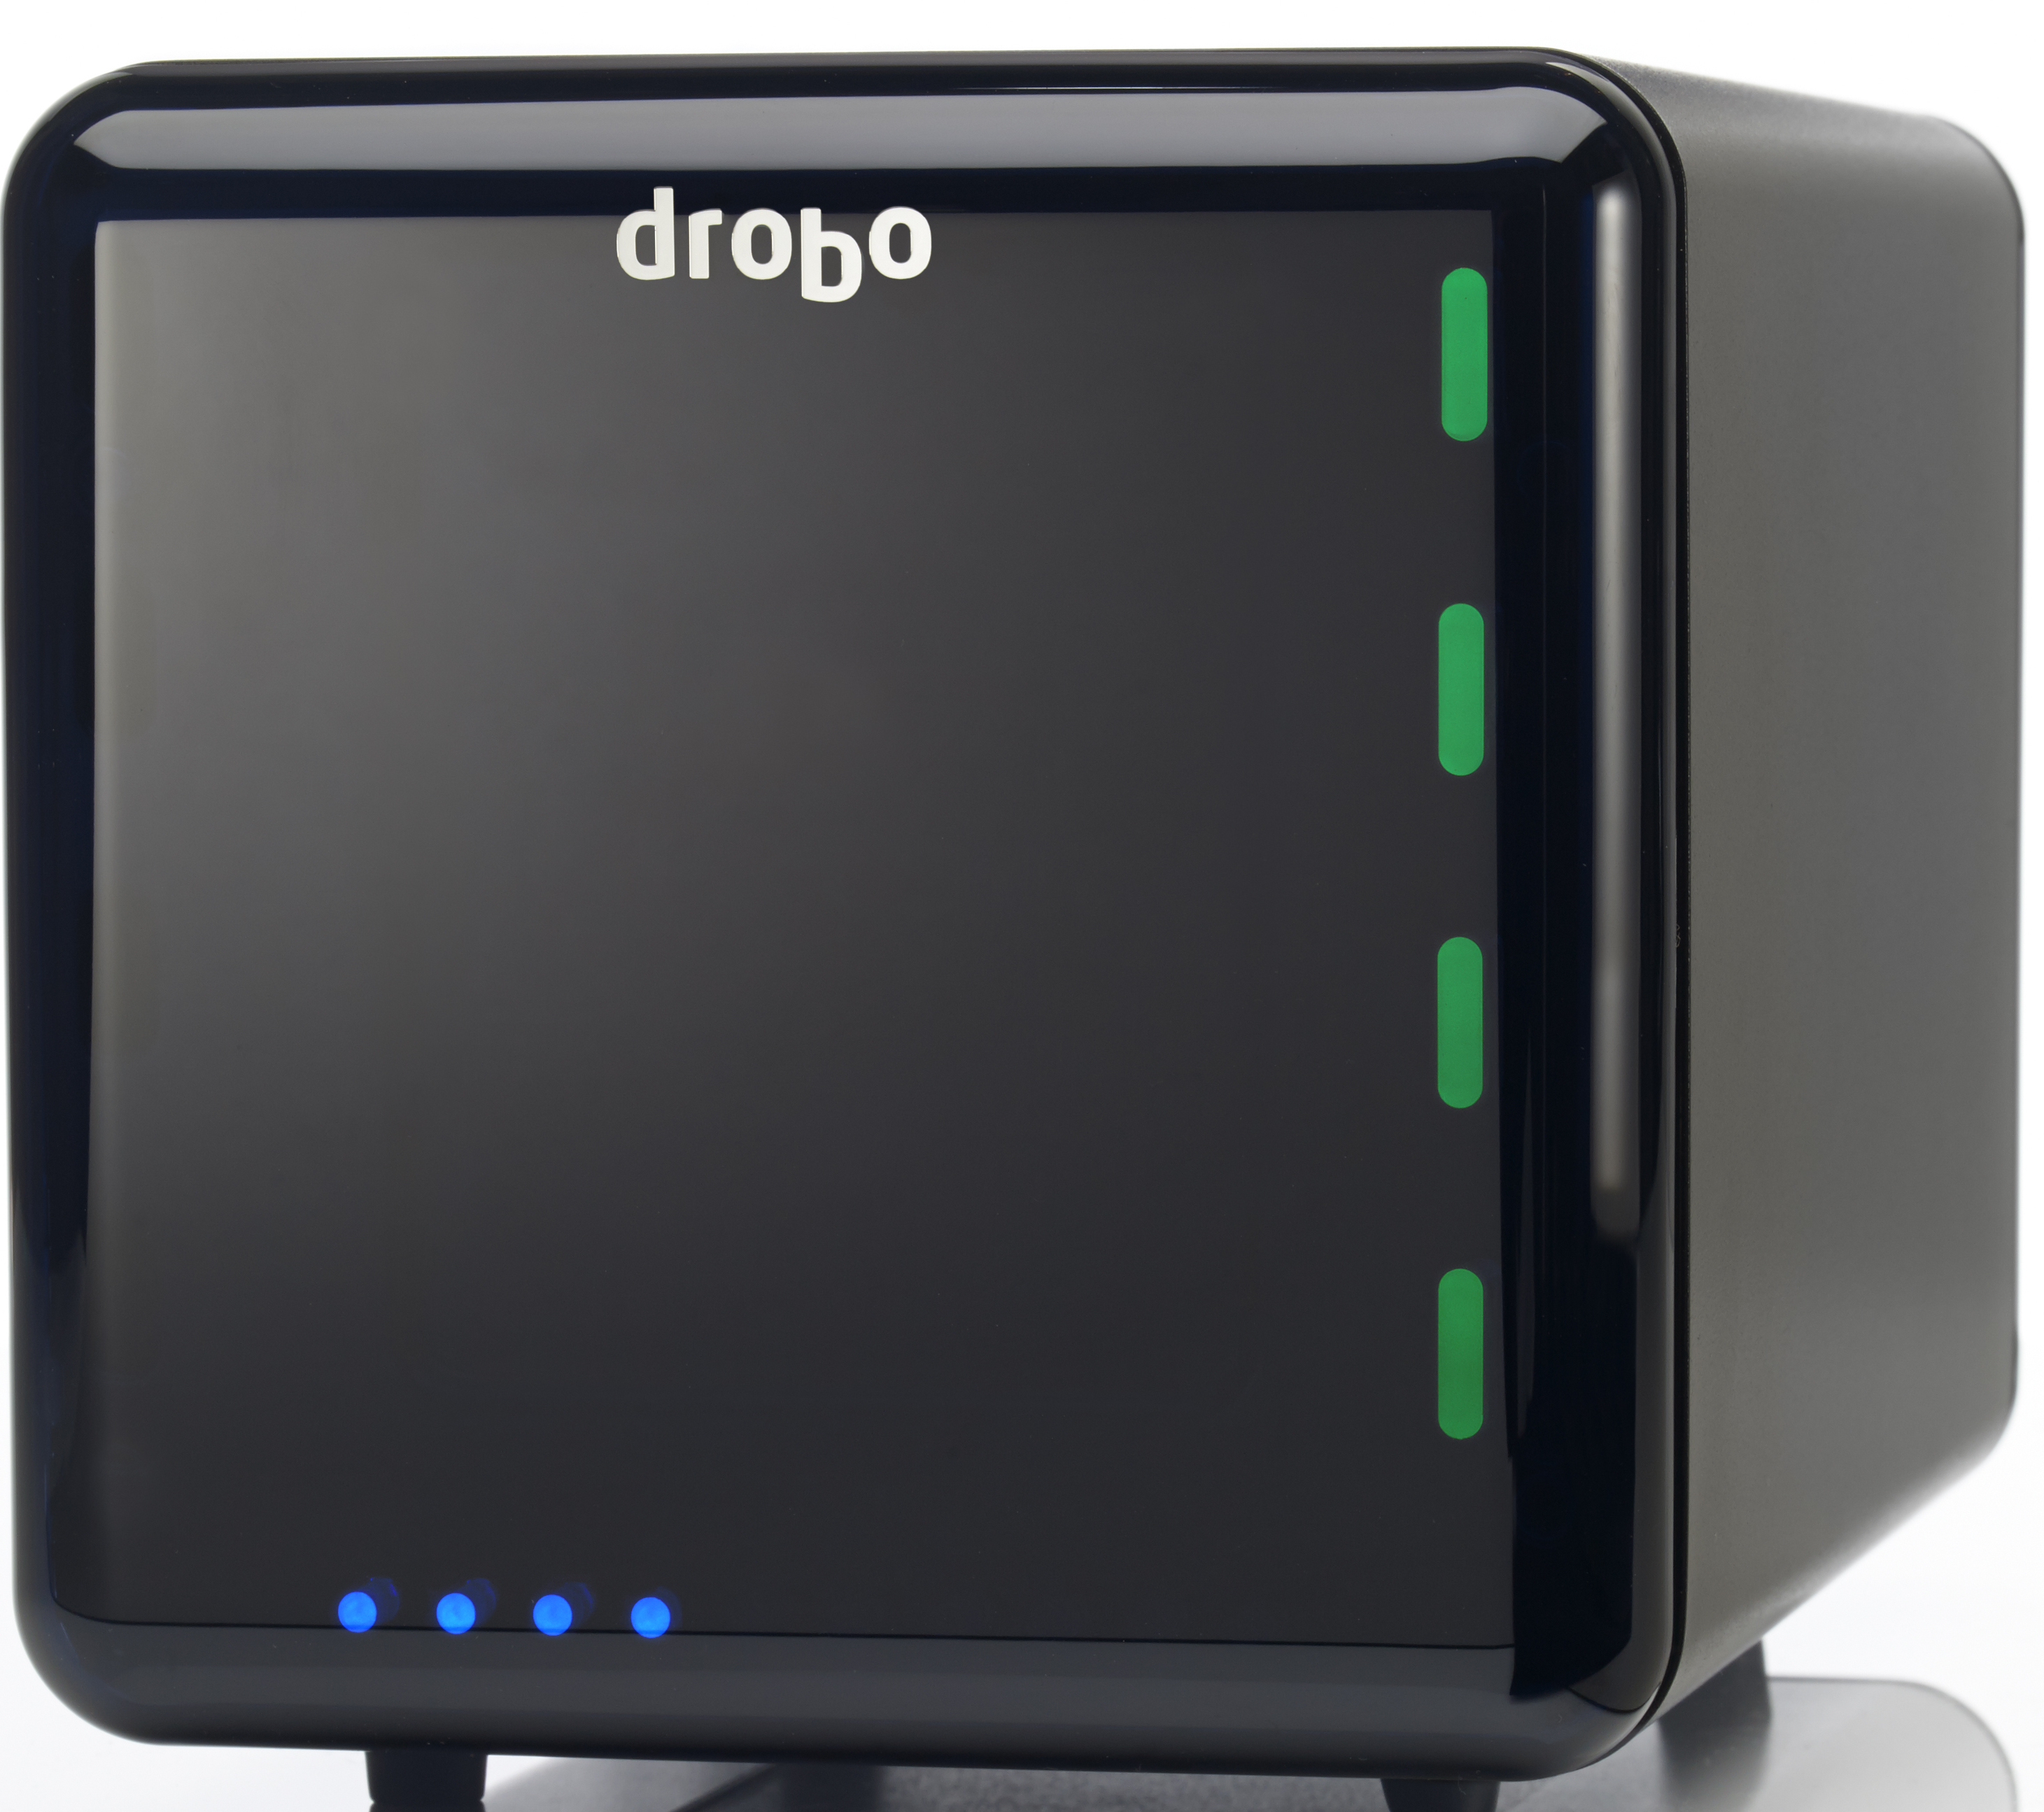 Drobo's newest storage array is its most affordable yet and includes